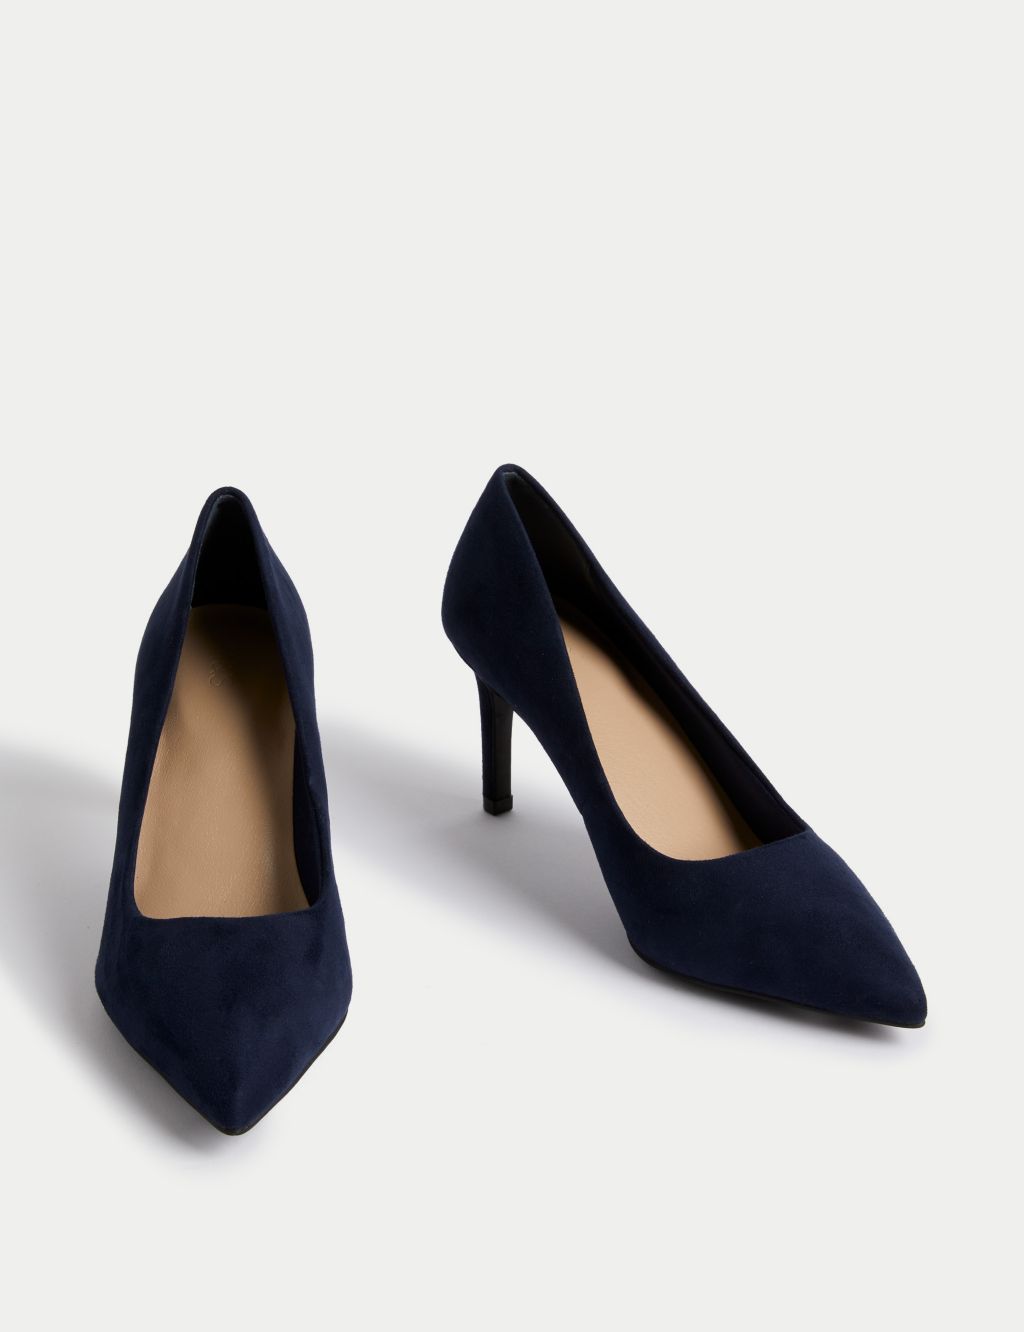 Slip On Stiletto Heel Pointed Court Shoes image 2